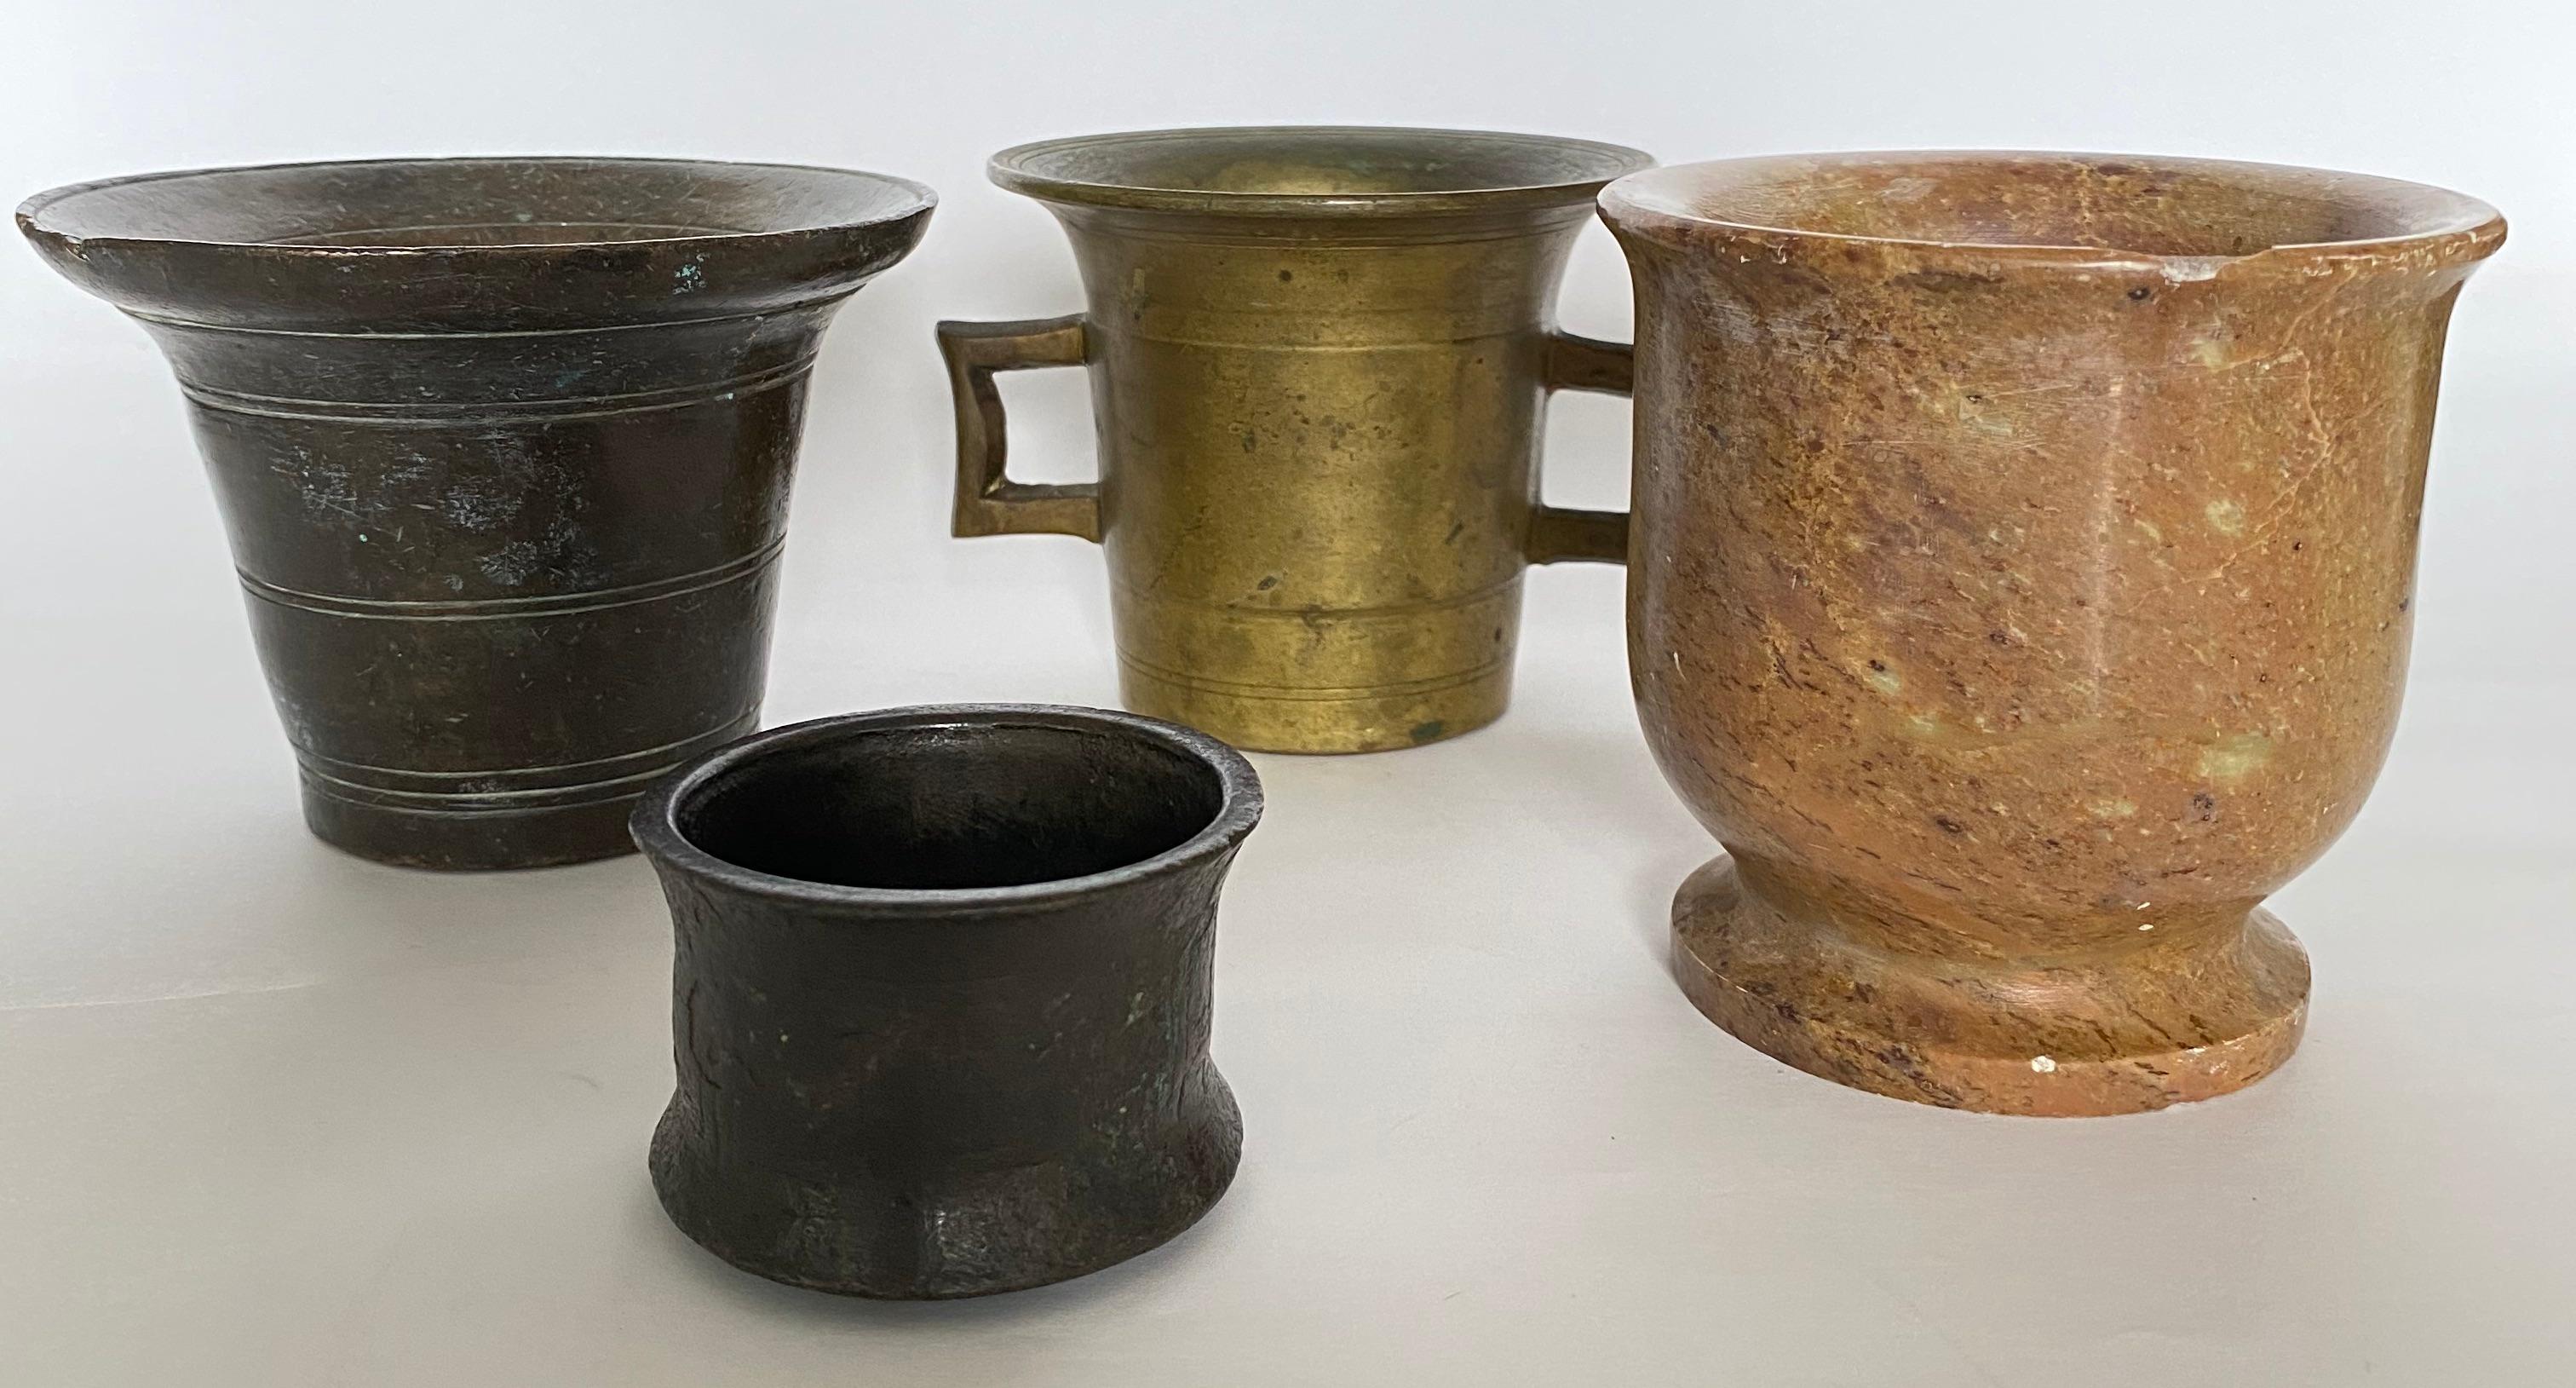 Charming collection of 4 vintage European bronze, brass and marble pharmacy and herbalist mortars ranging in age from the 17th-20th century. Each shows evidence of working use. Ranging in size from 1.75